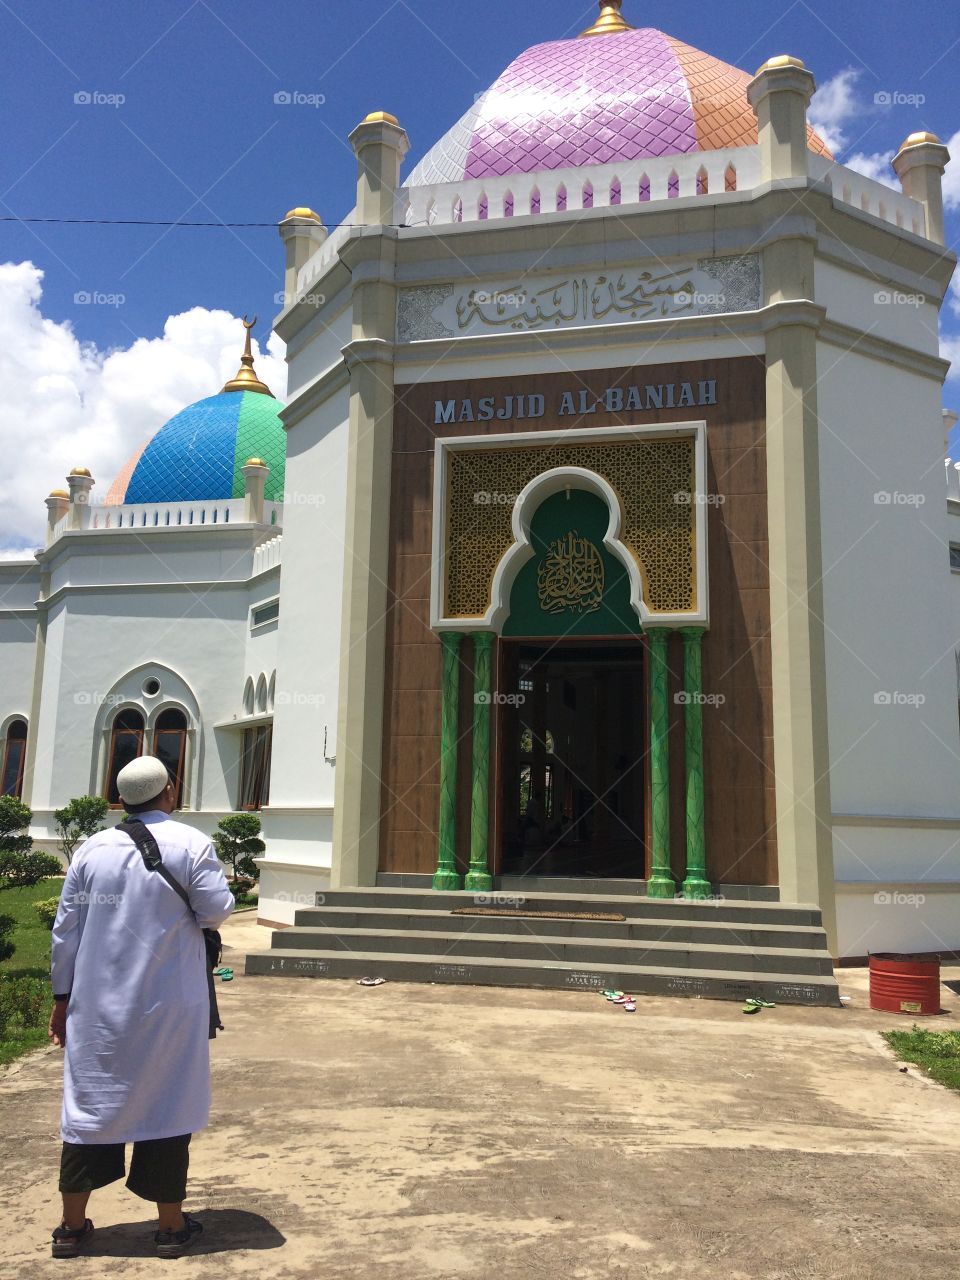 mosque is my place of worship
